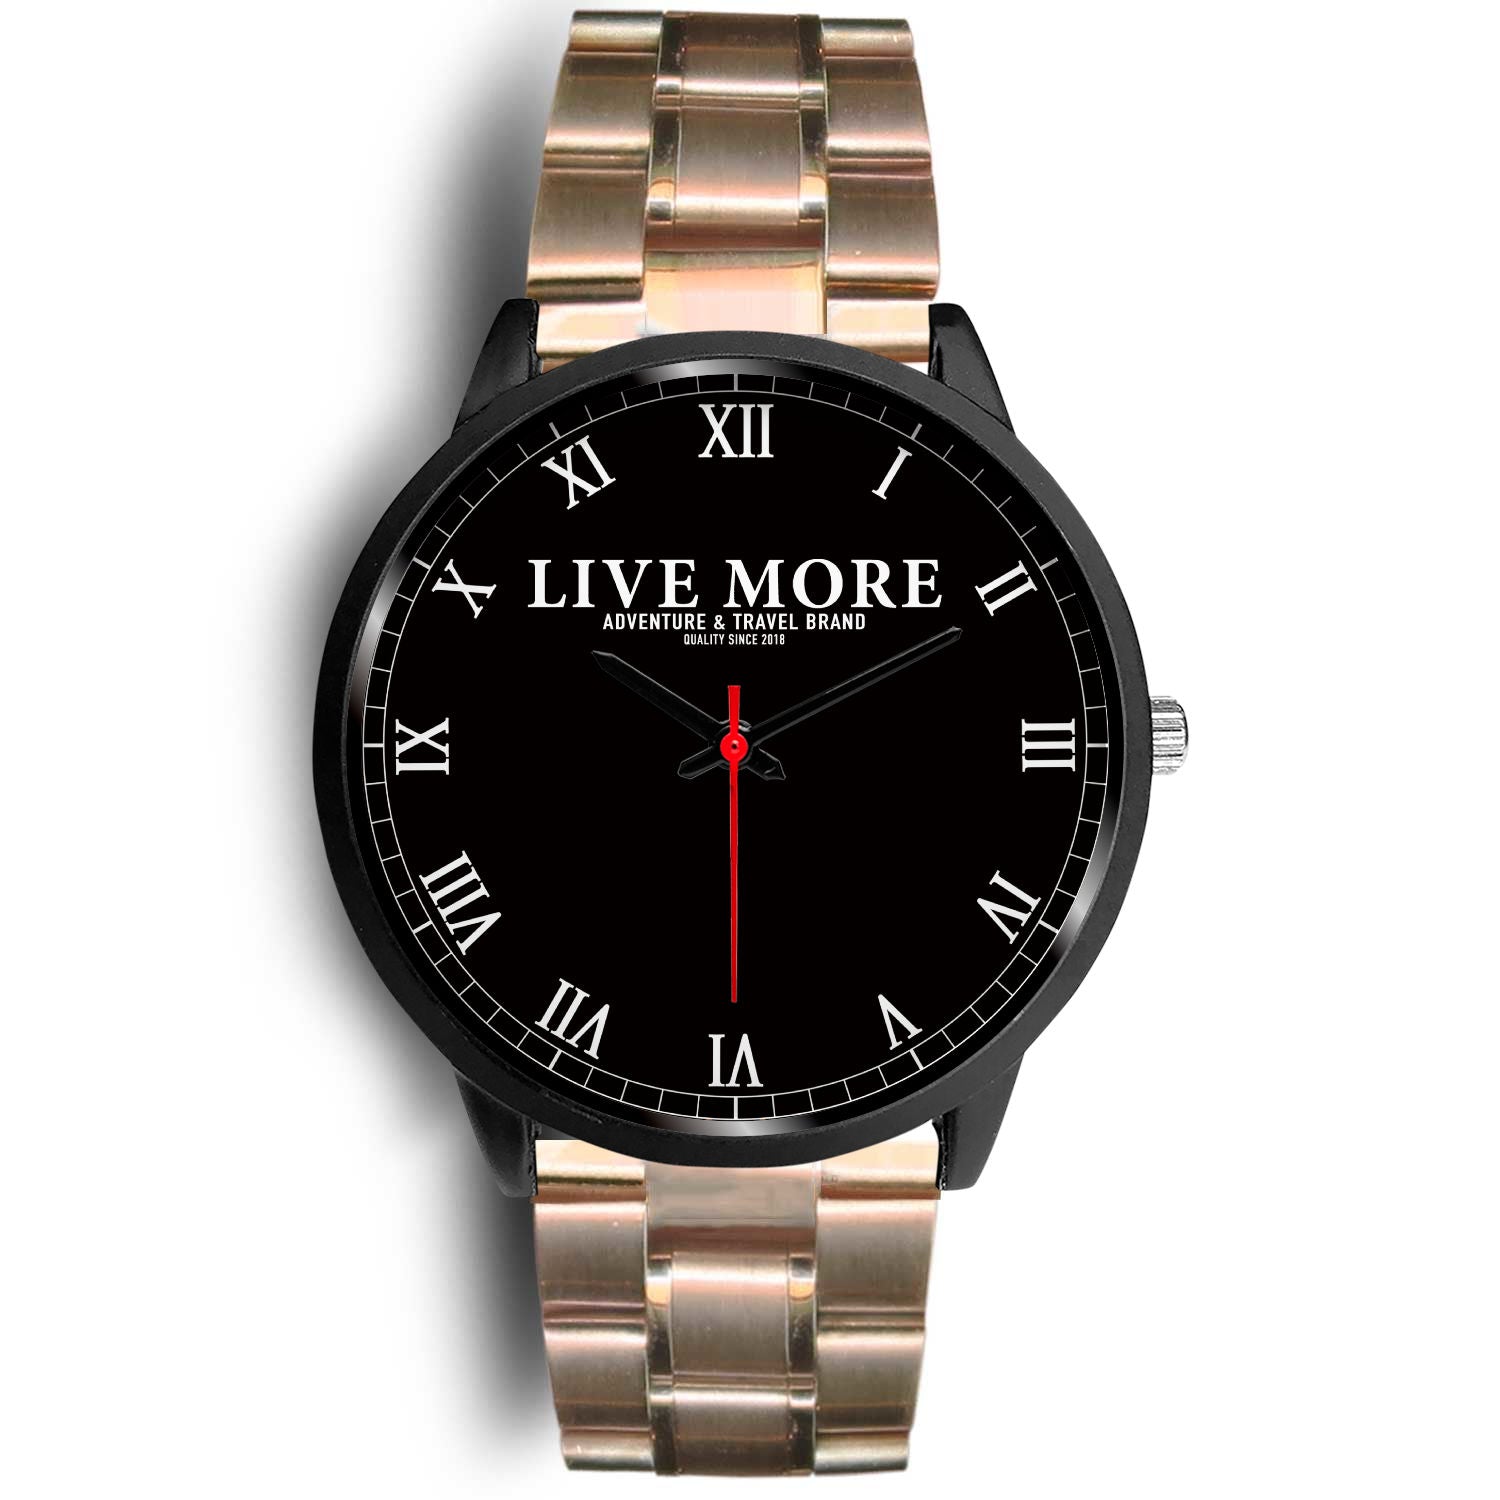 "The Classic" Live More Watch - Live More